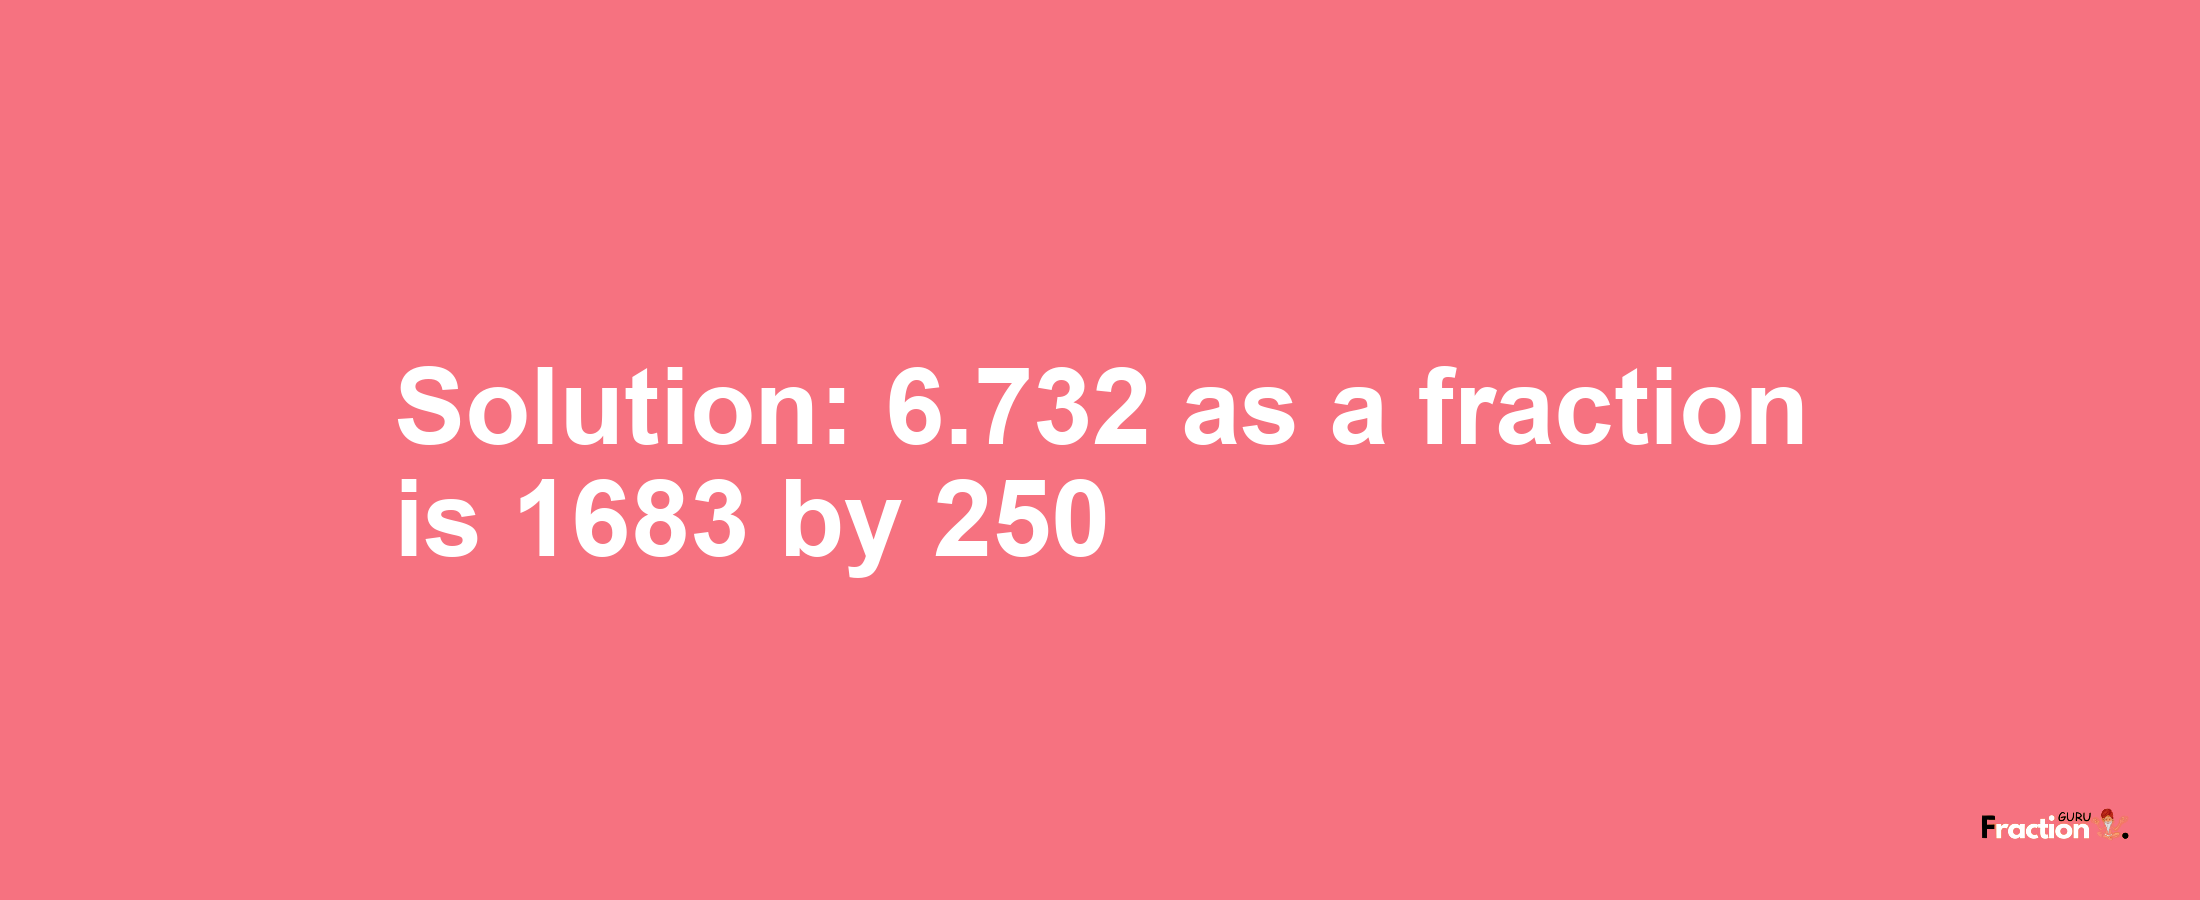 Solution:6.732 as a fraction is 1683/250